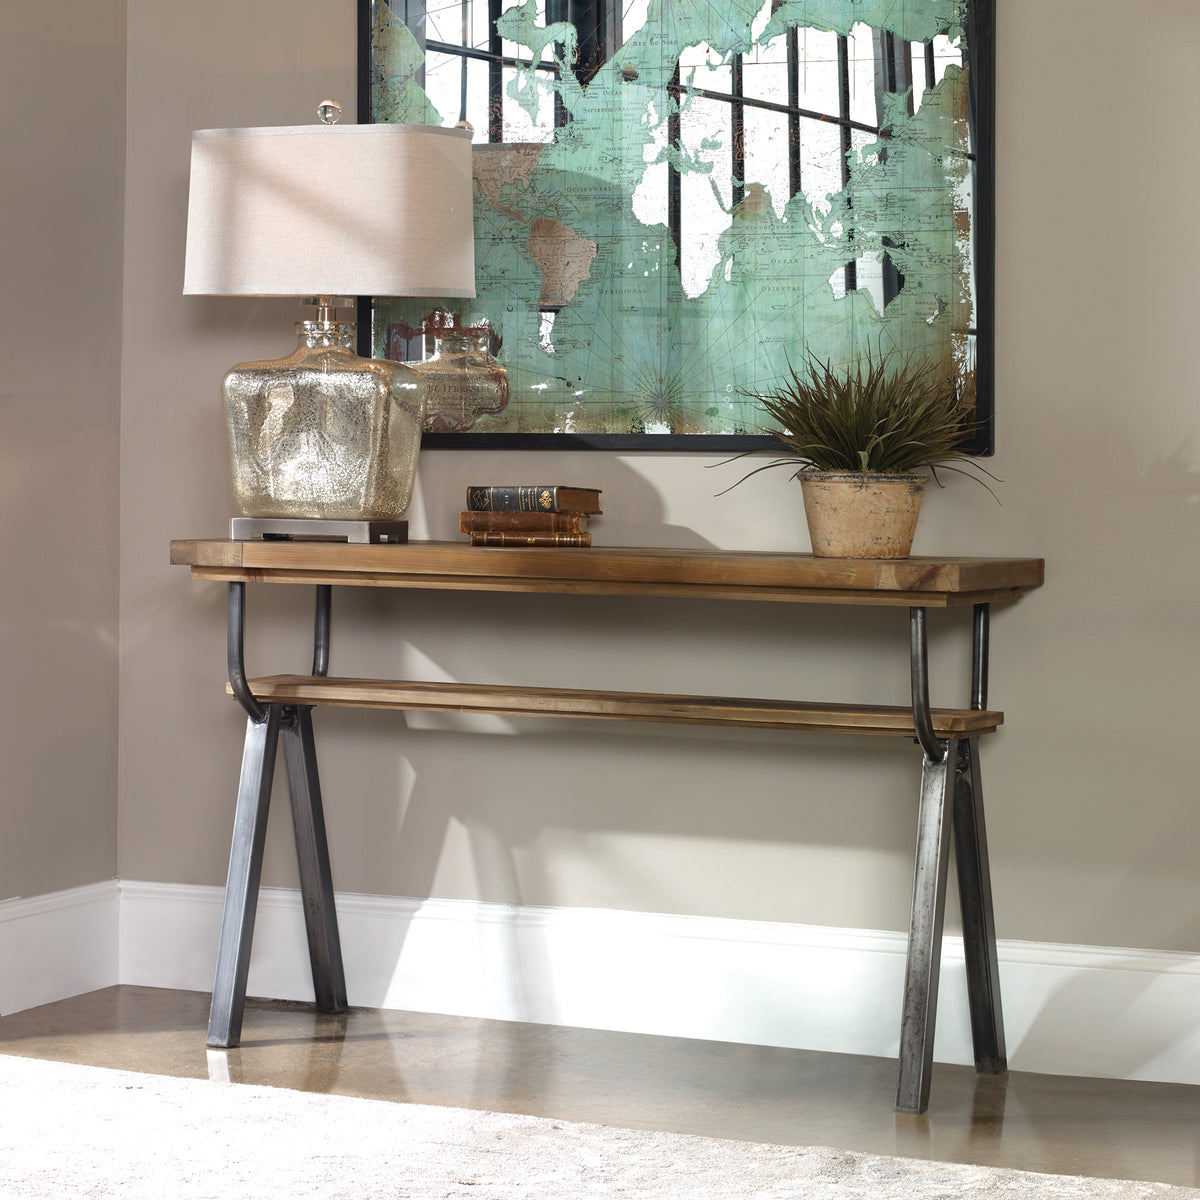 Uttermost Domini Industrial Console Table